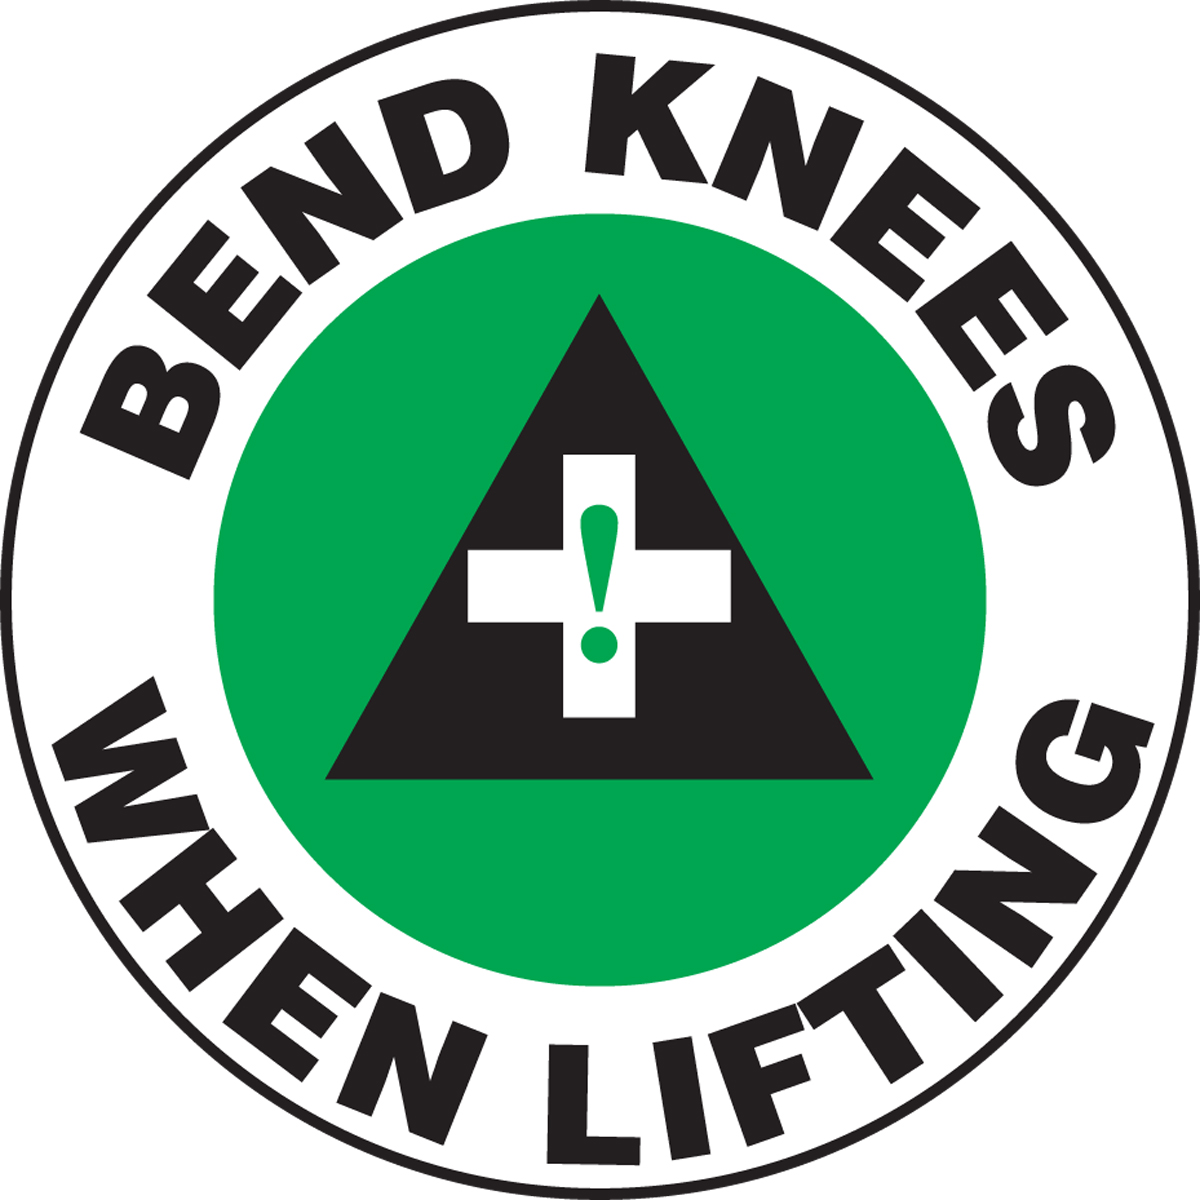 BEND KNEES WHEN LIFTING